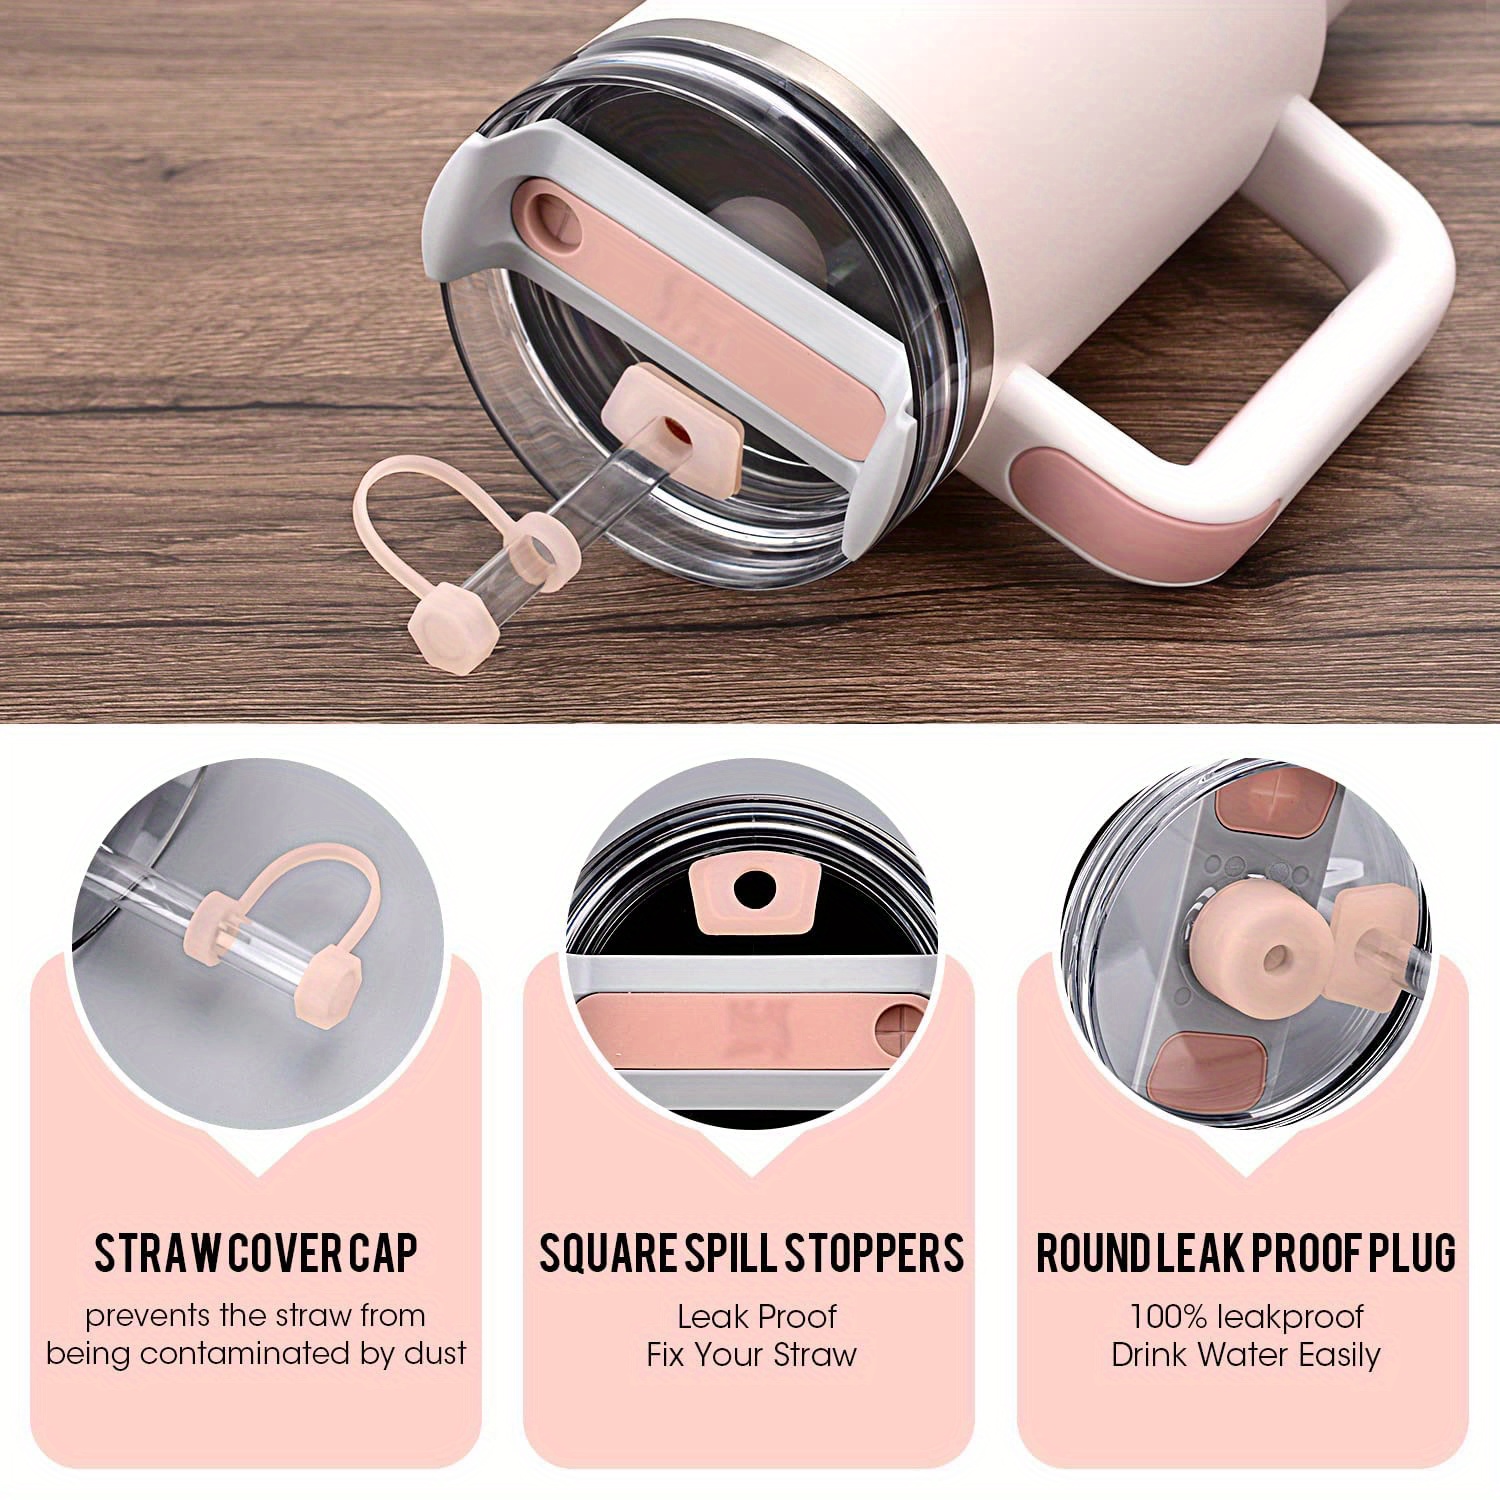 Stahp & Go Launches Innovative Silicone Spill Stopper for Stanley Cups